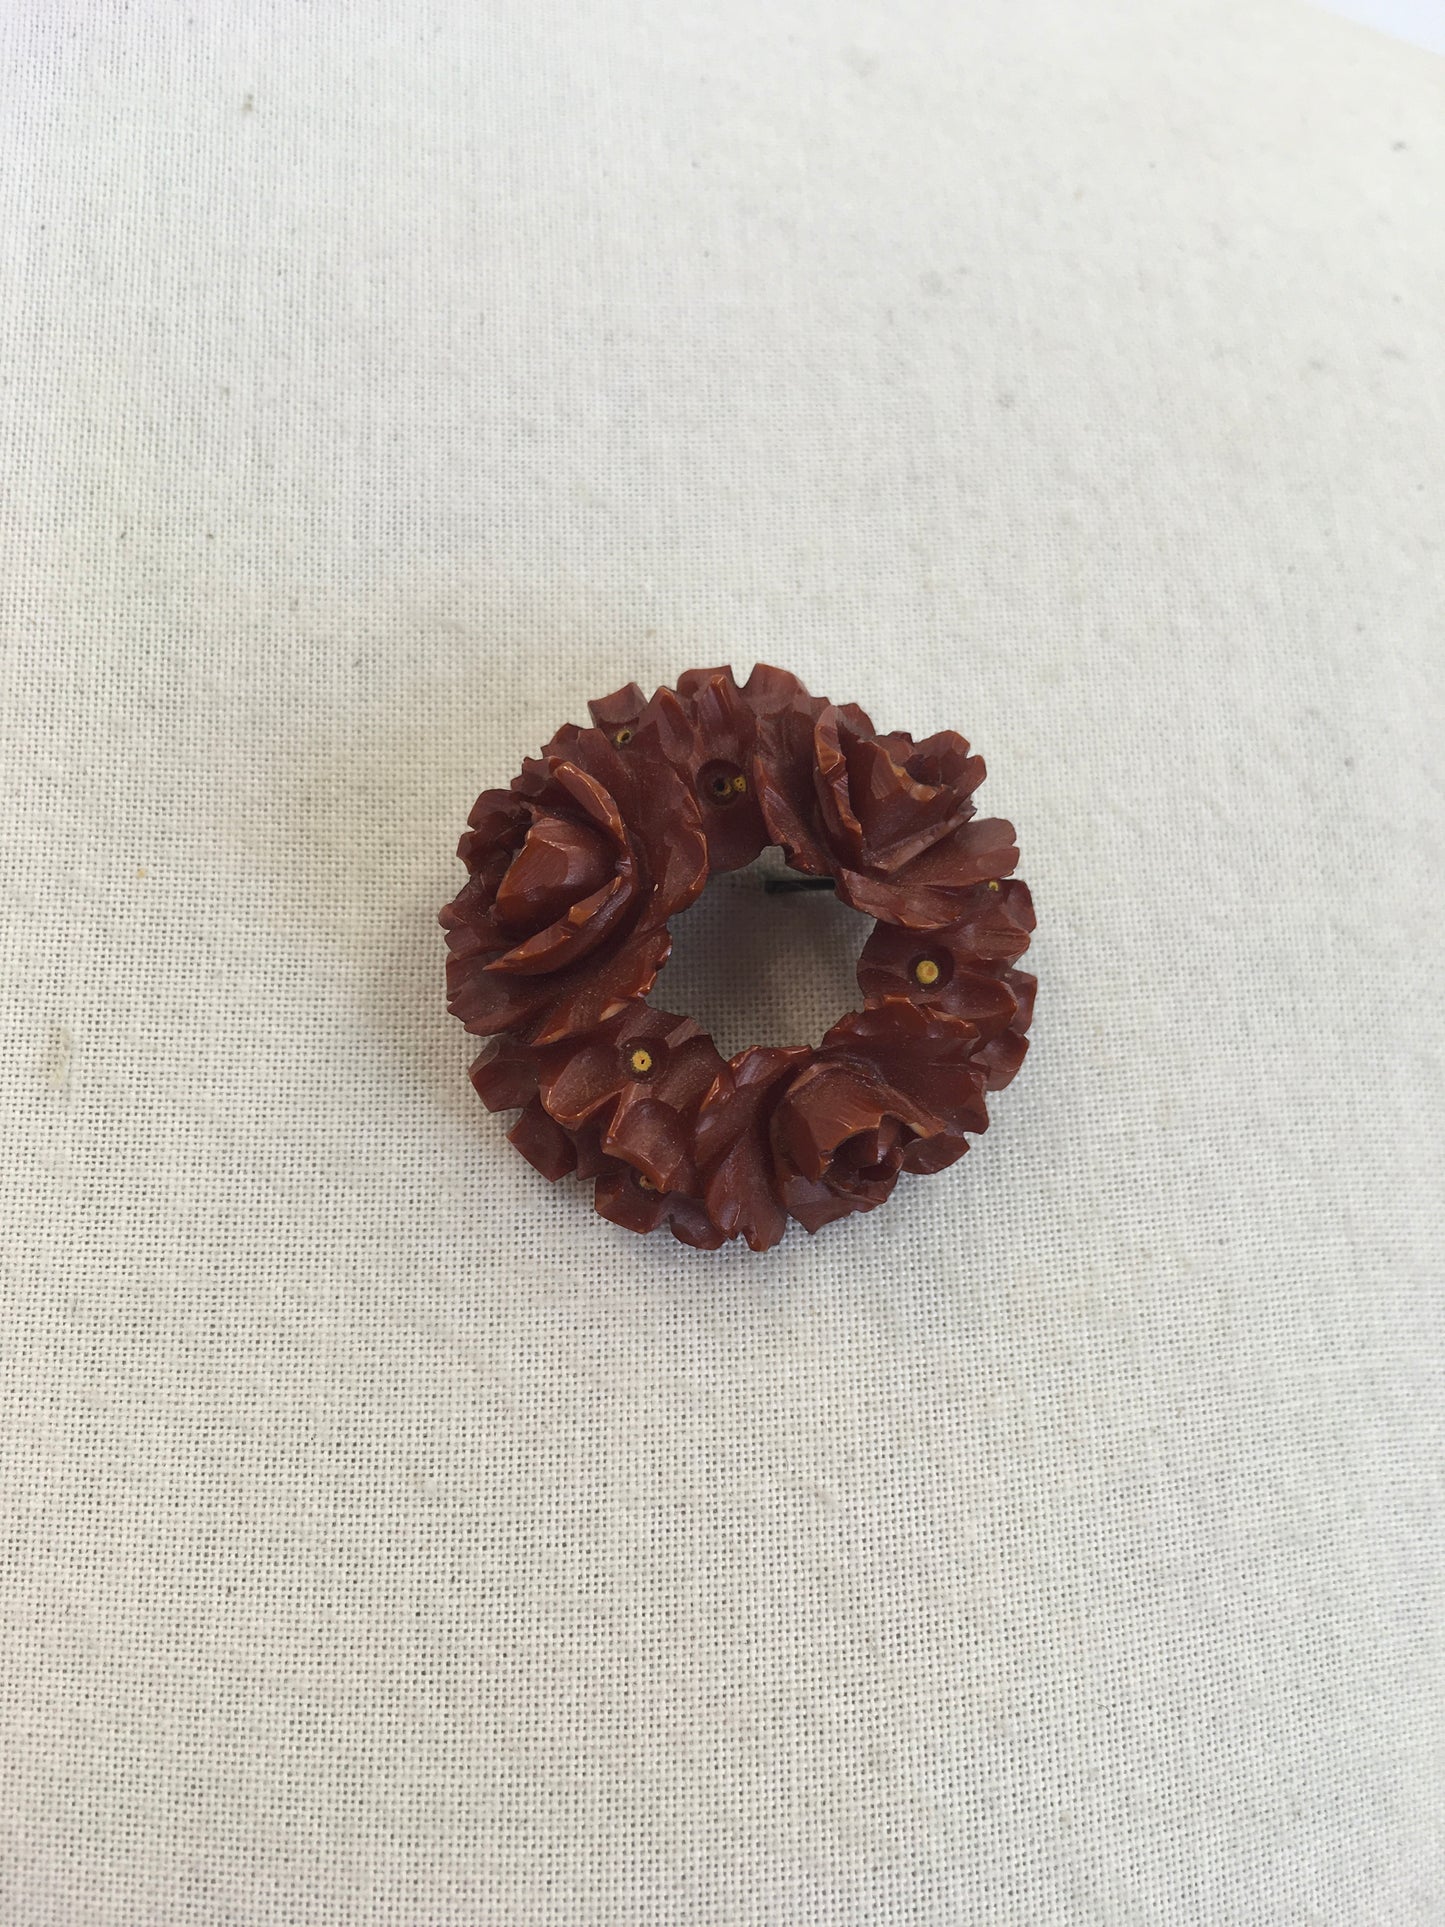 Original 1930's Darling Celluloid Floral Brooch - In A Warming Brown